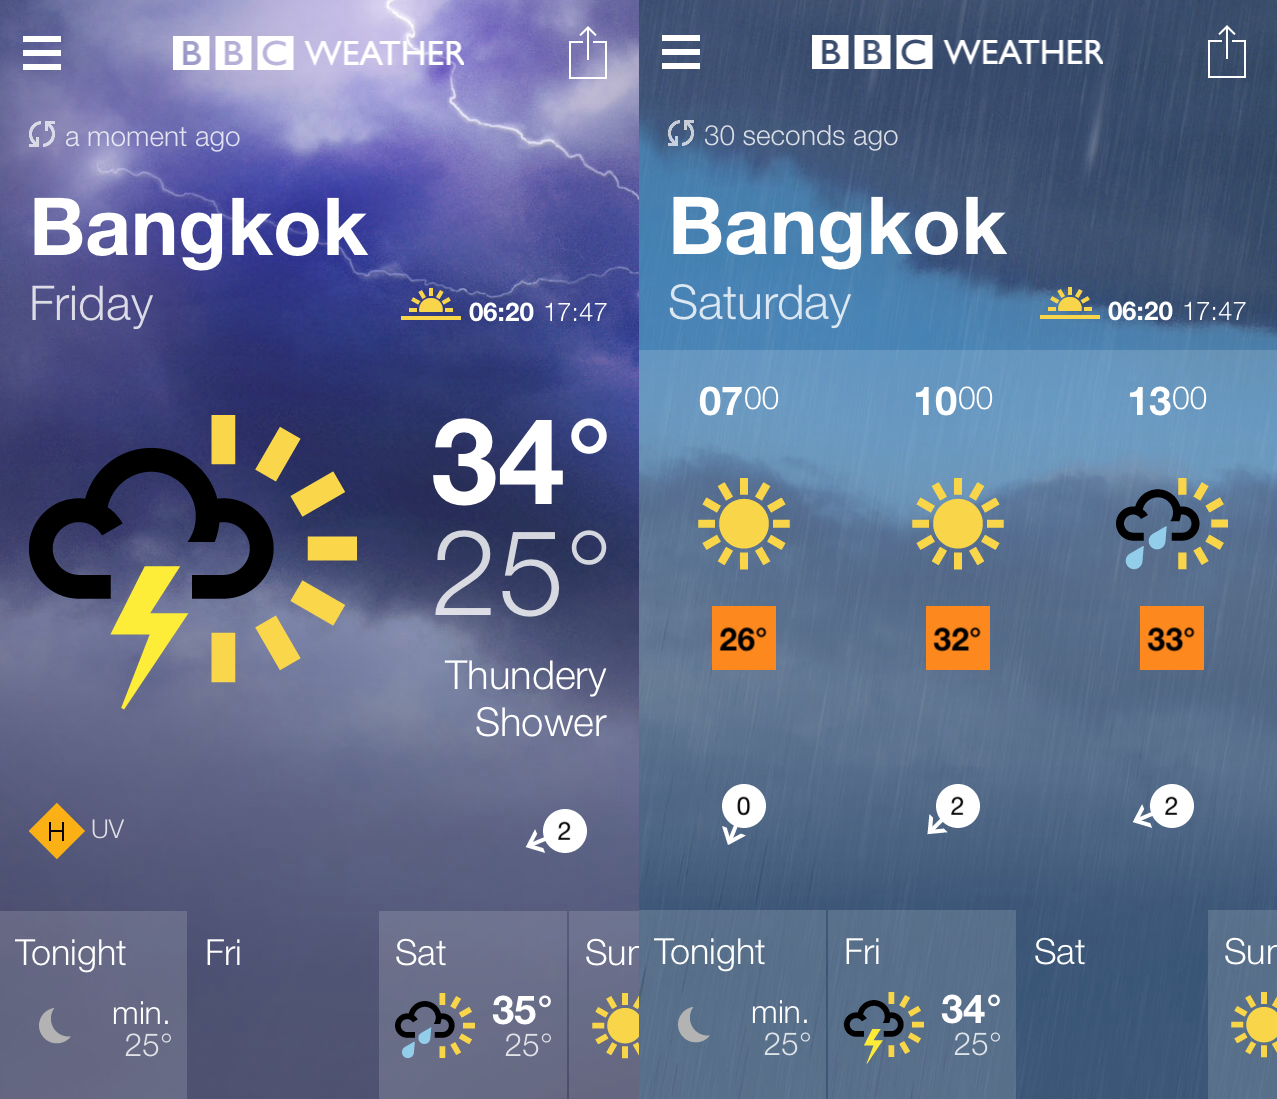 BBC weather picture for Bangkok 